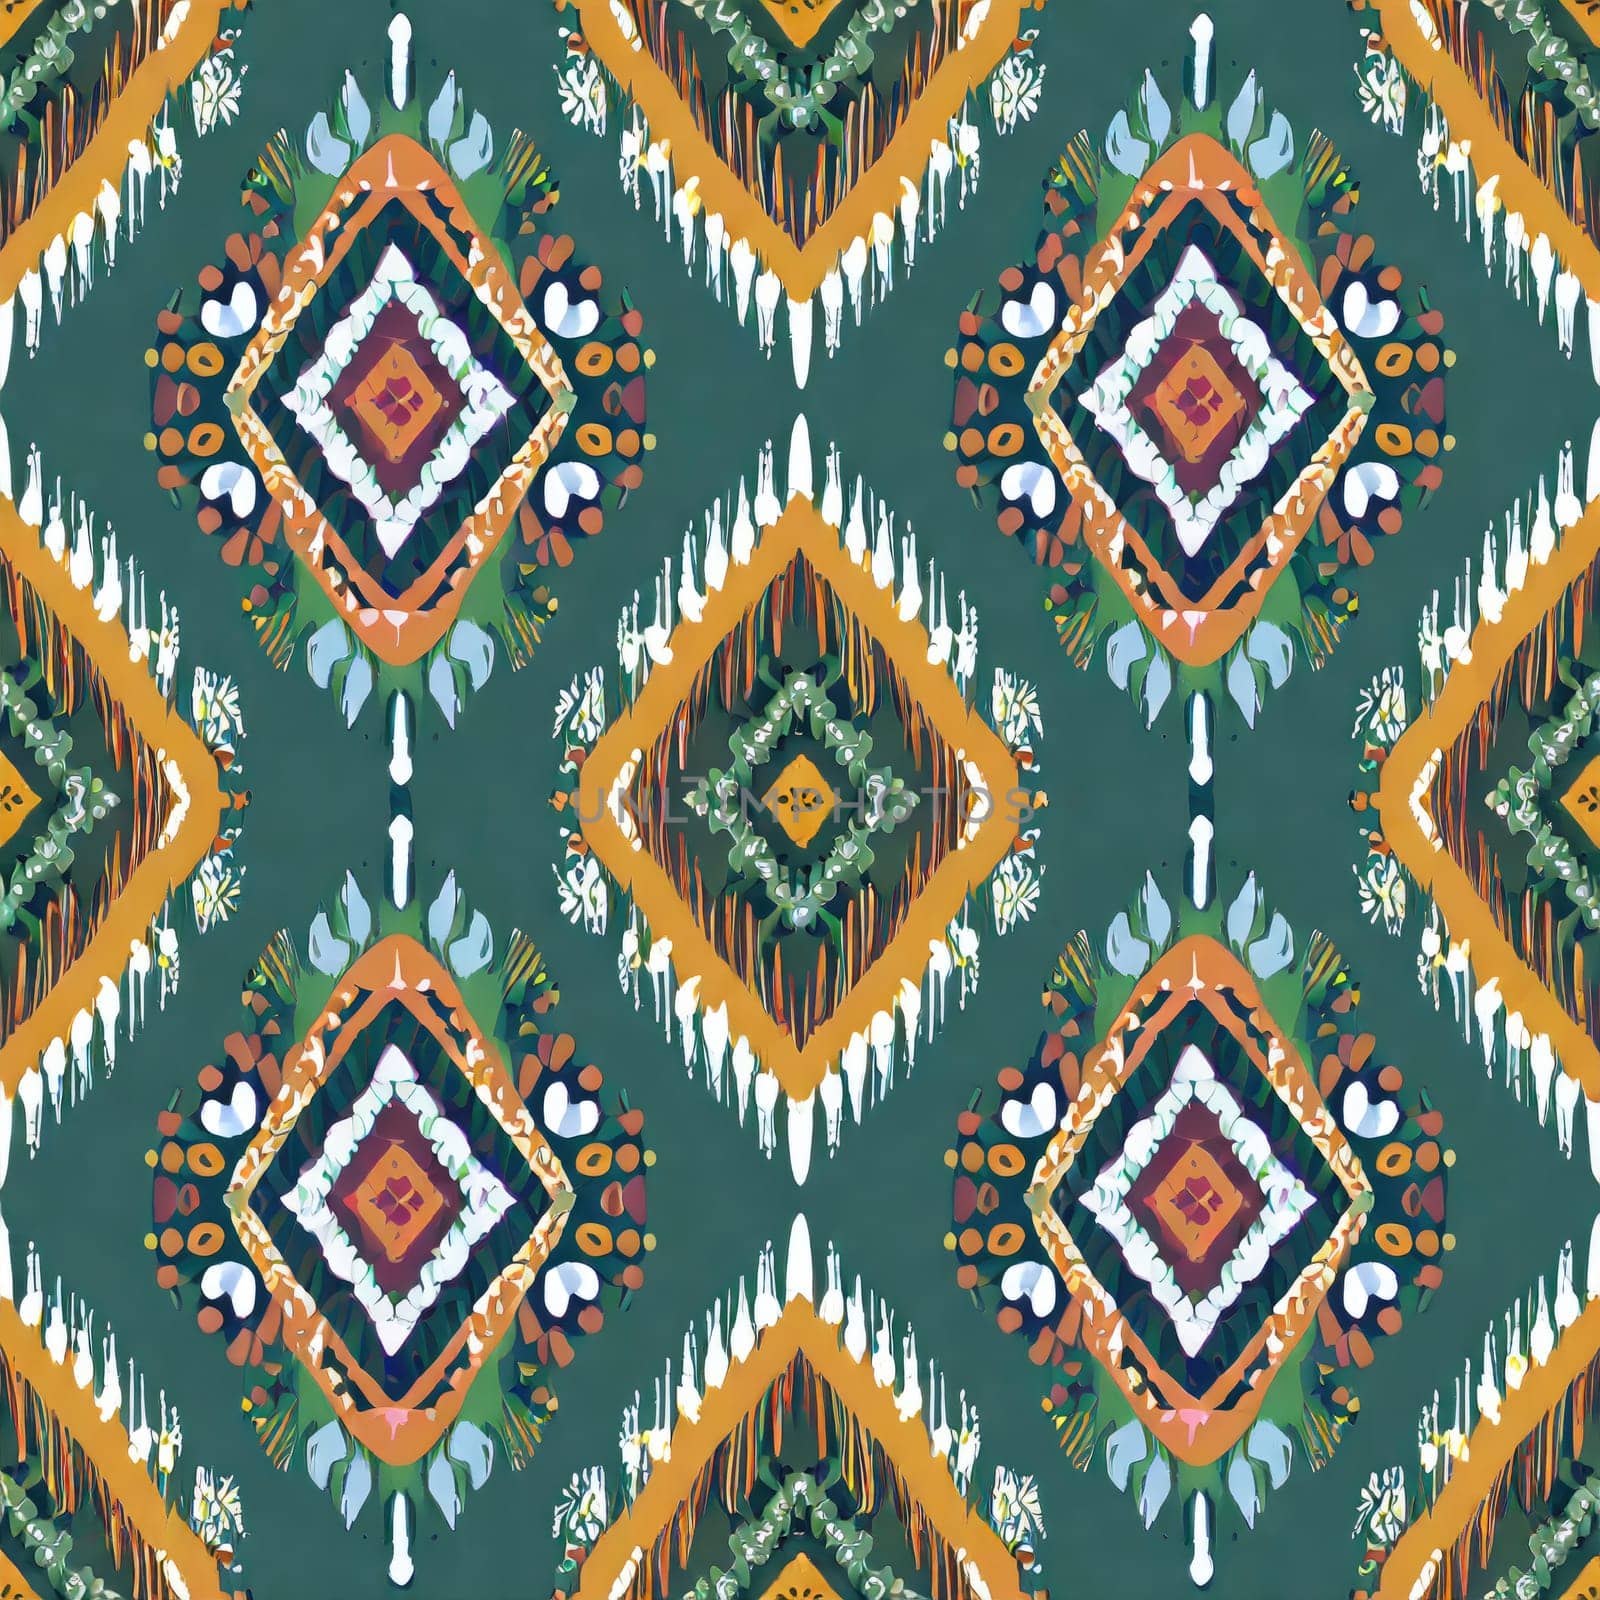  Ikat ethnic abstract beautiful art. Ikat seamless pattern in tribal, folk embroidery. by PeaceYAY